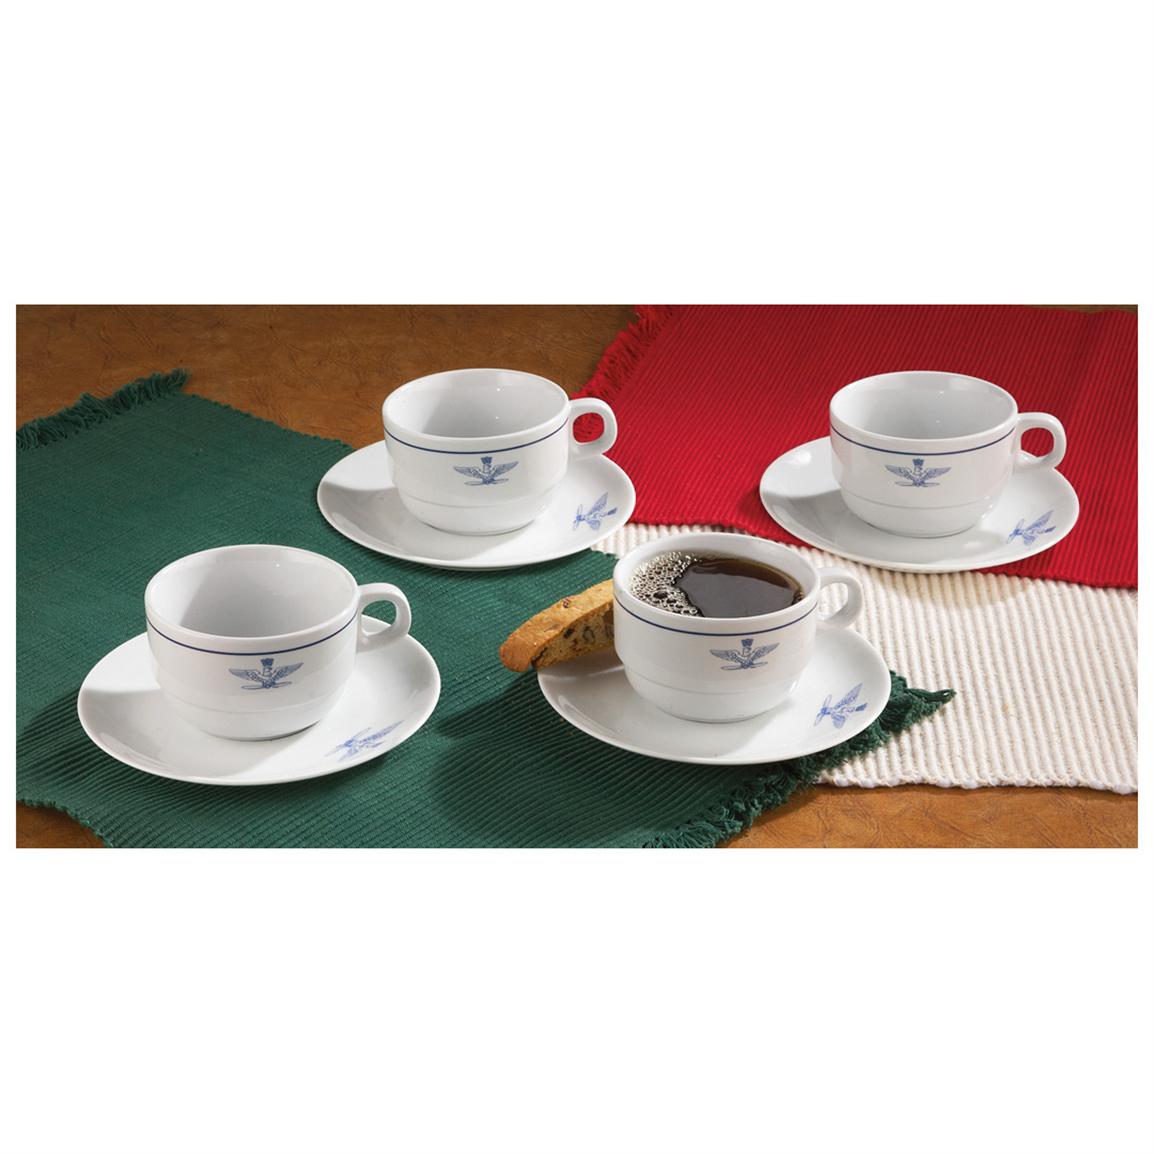 Italian Military Surplus Cappuccino Cup and Saucer Set, 8 Piece, New